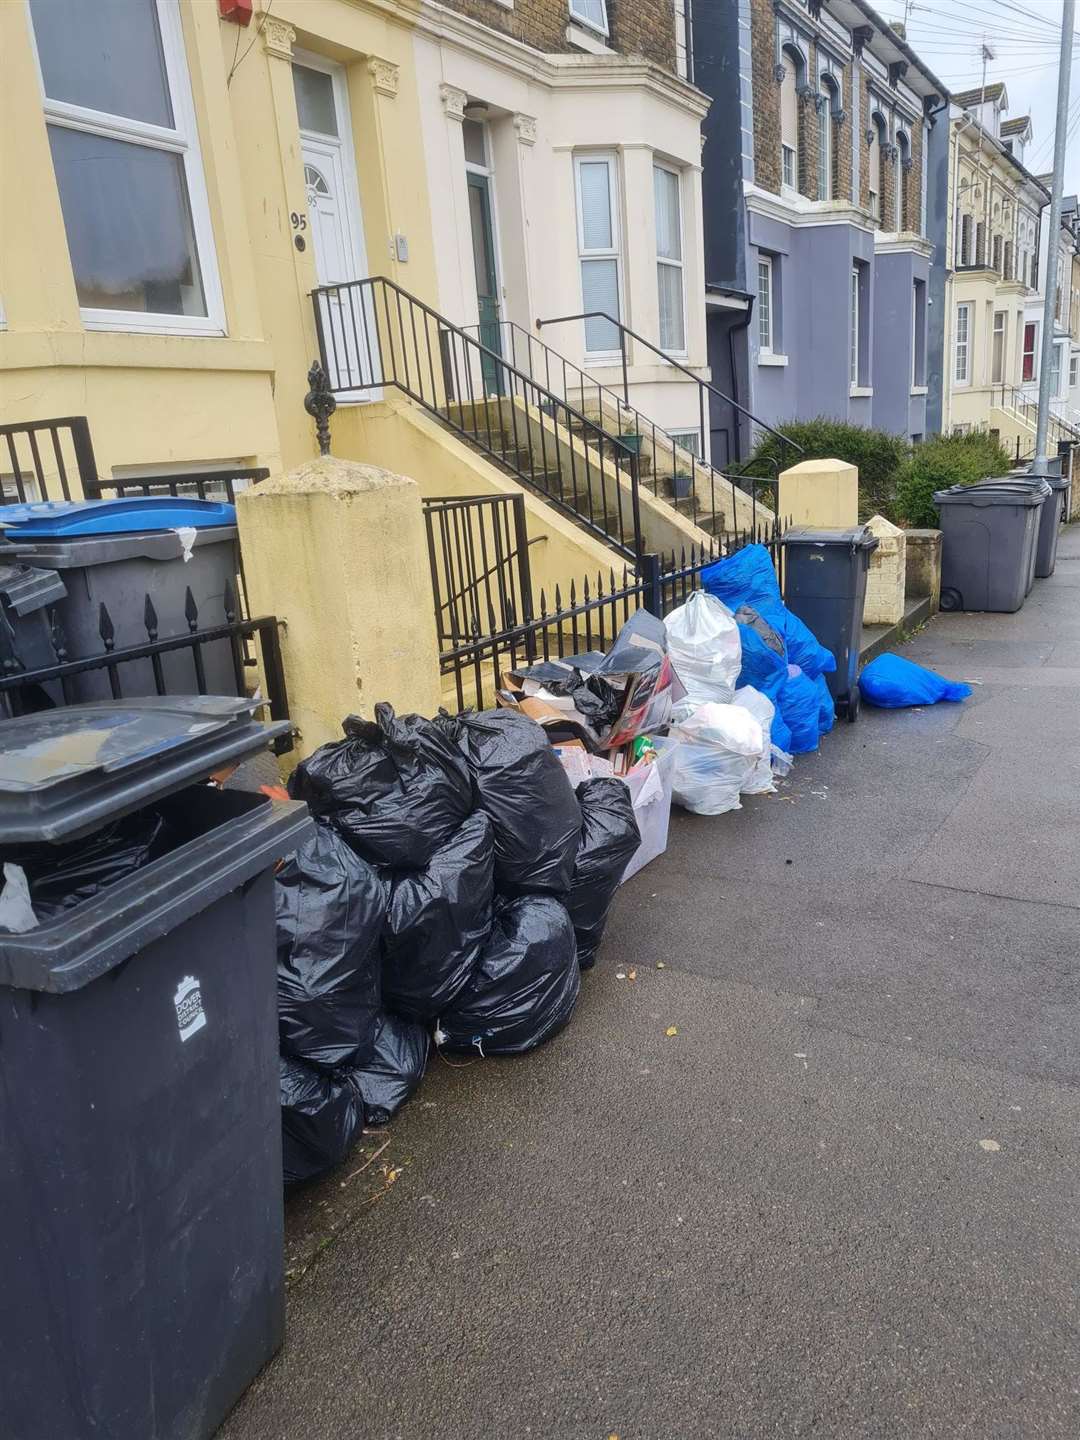 Communal bins were a problem. Here were 26 bags of uncollected rubbish. Picture: Lisa Ibrahim